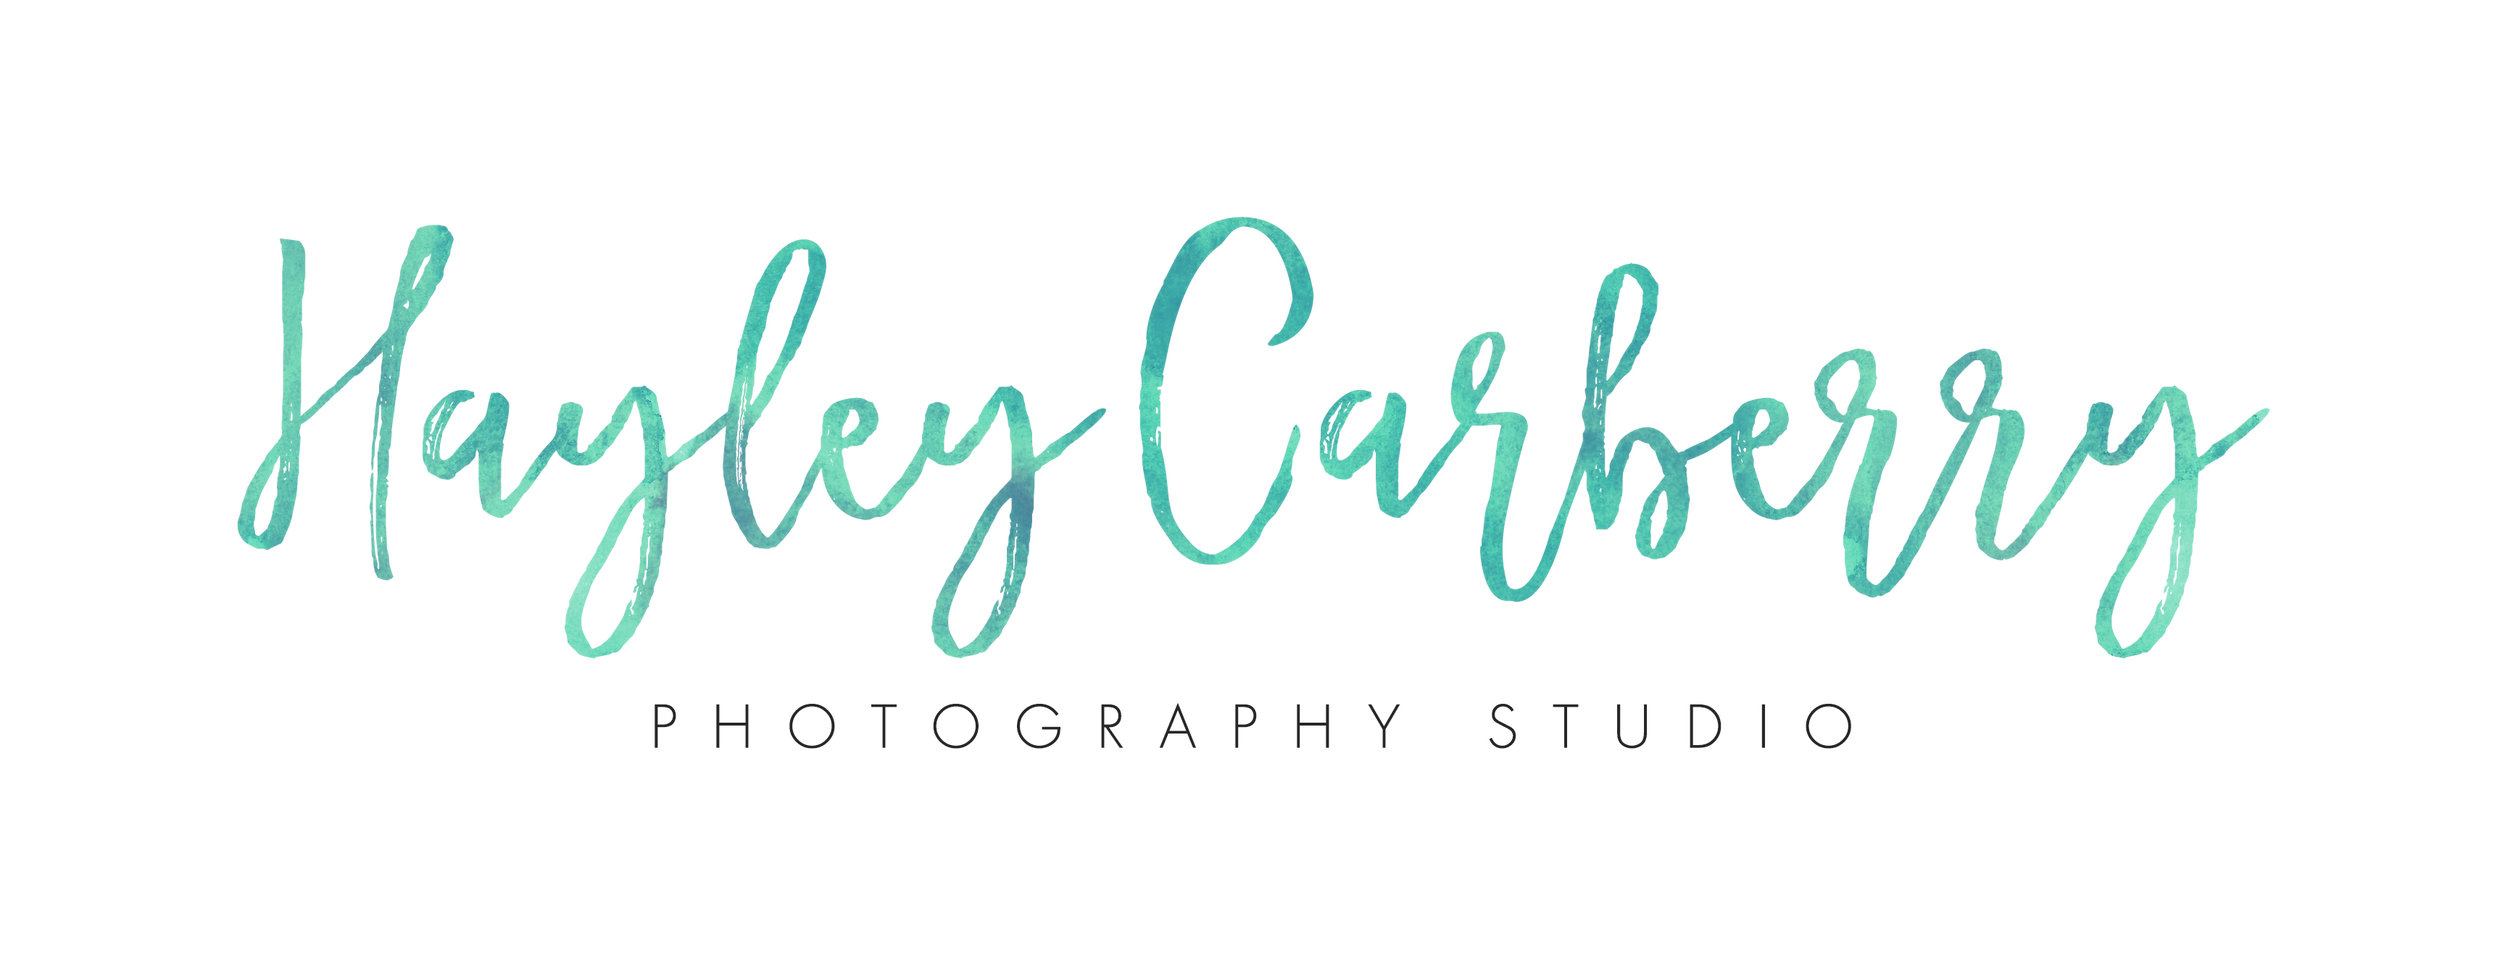 Hayley Carberry Photography